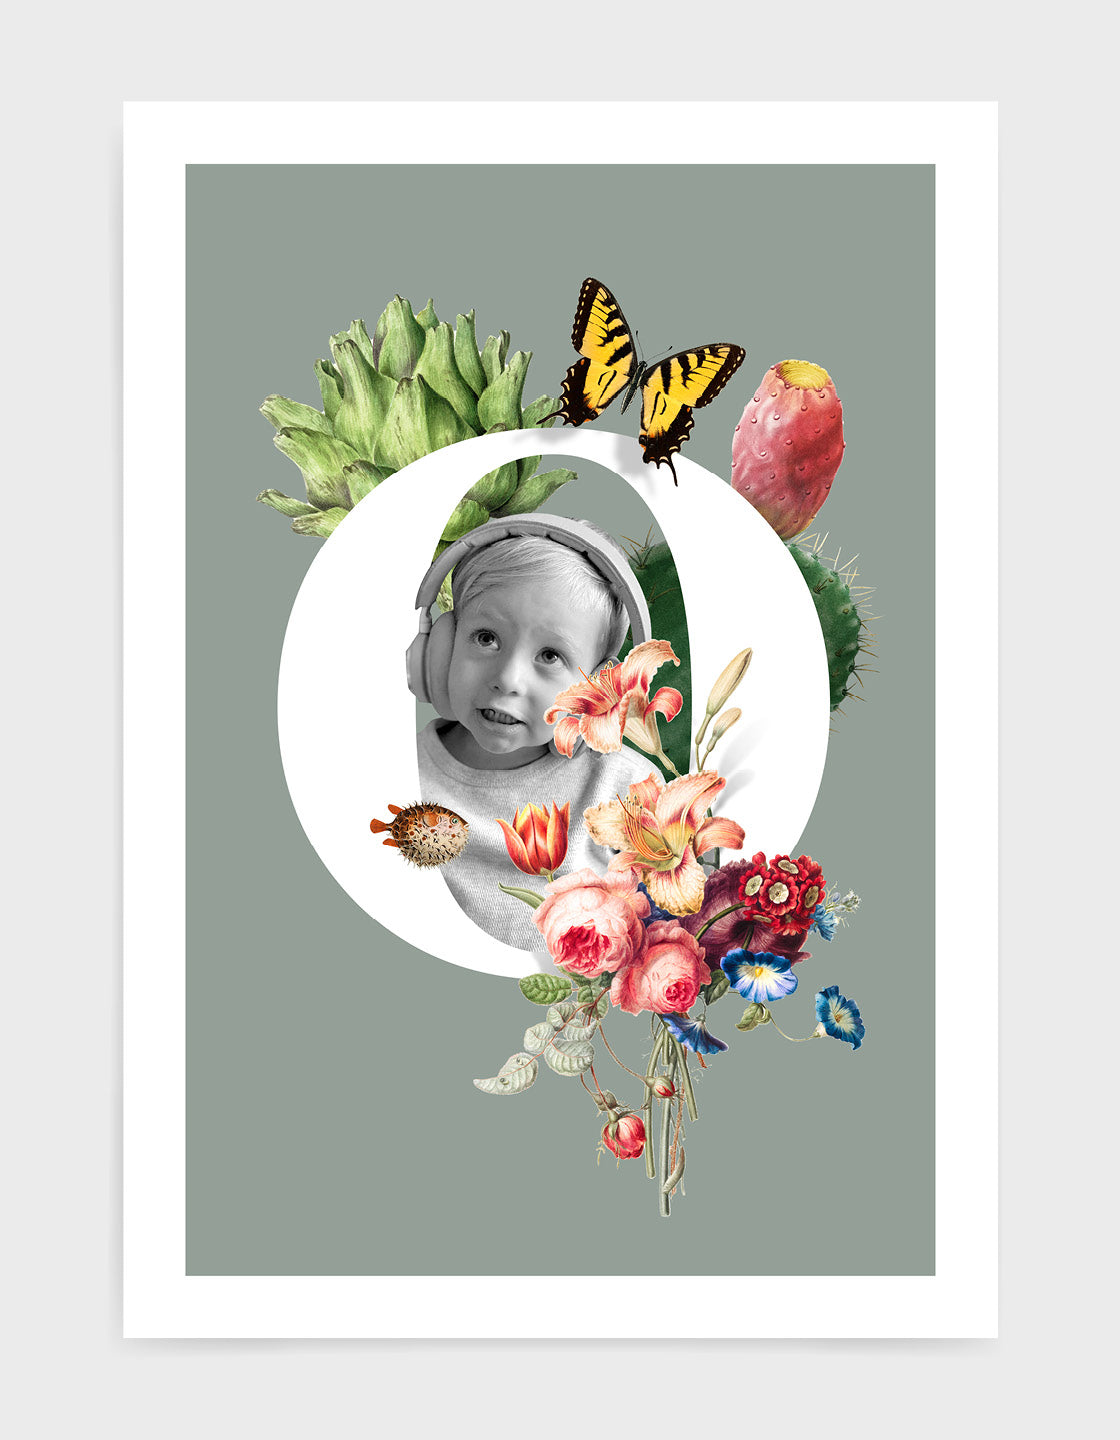 Initial print with custom photo and decorated with vintage illustrations including butterfly, flora and fauna against a grey background